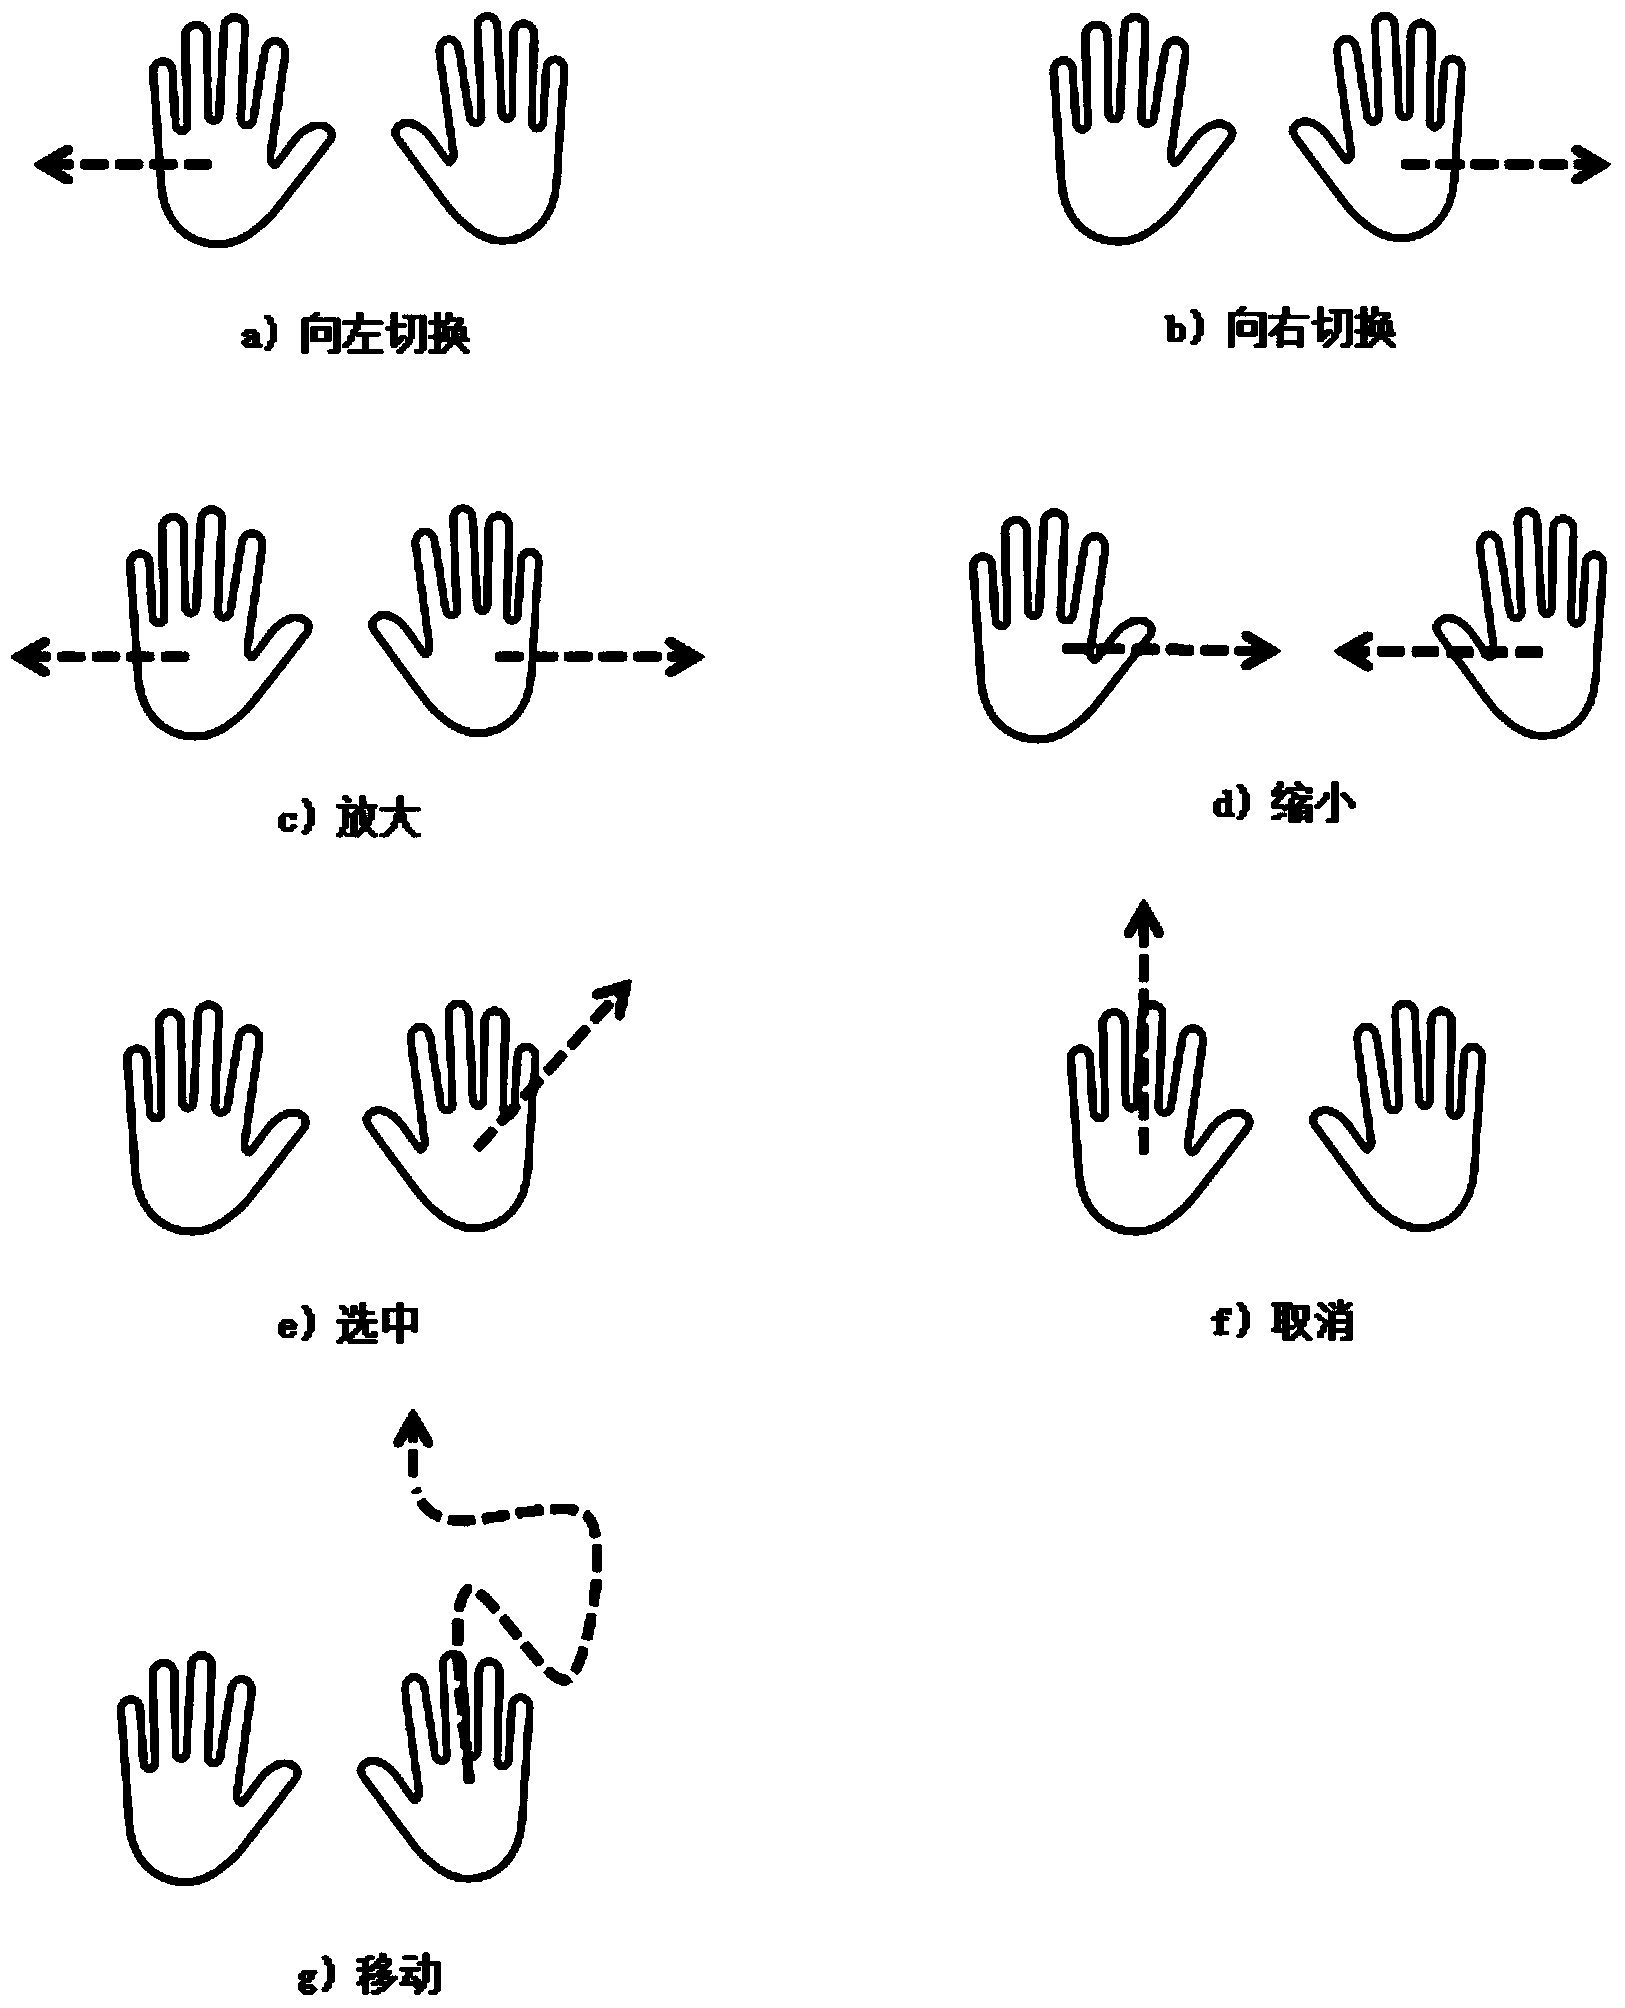 Method for controlling display wall through gestures on basis of Kinect